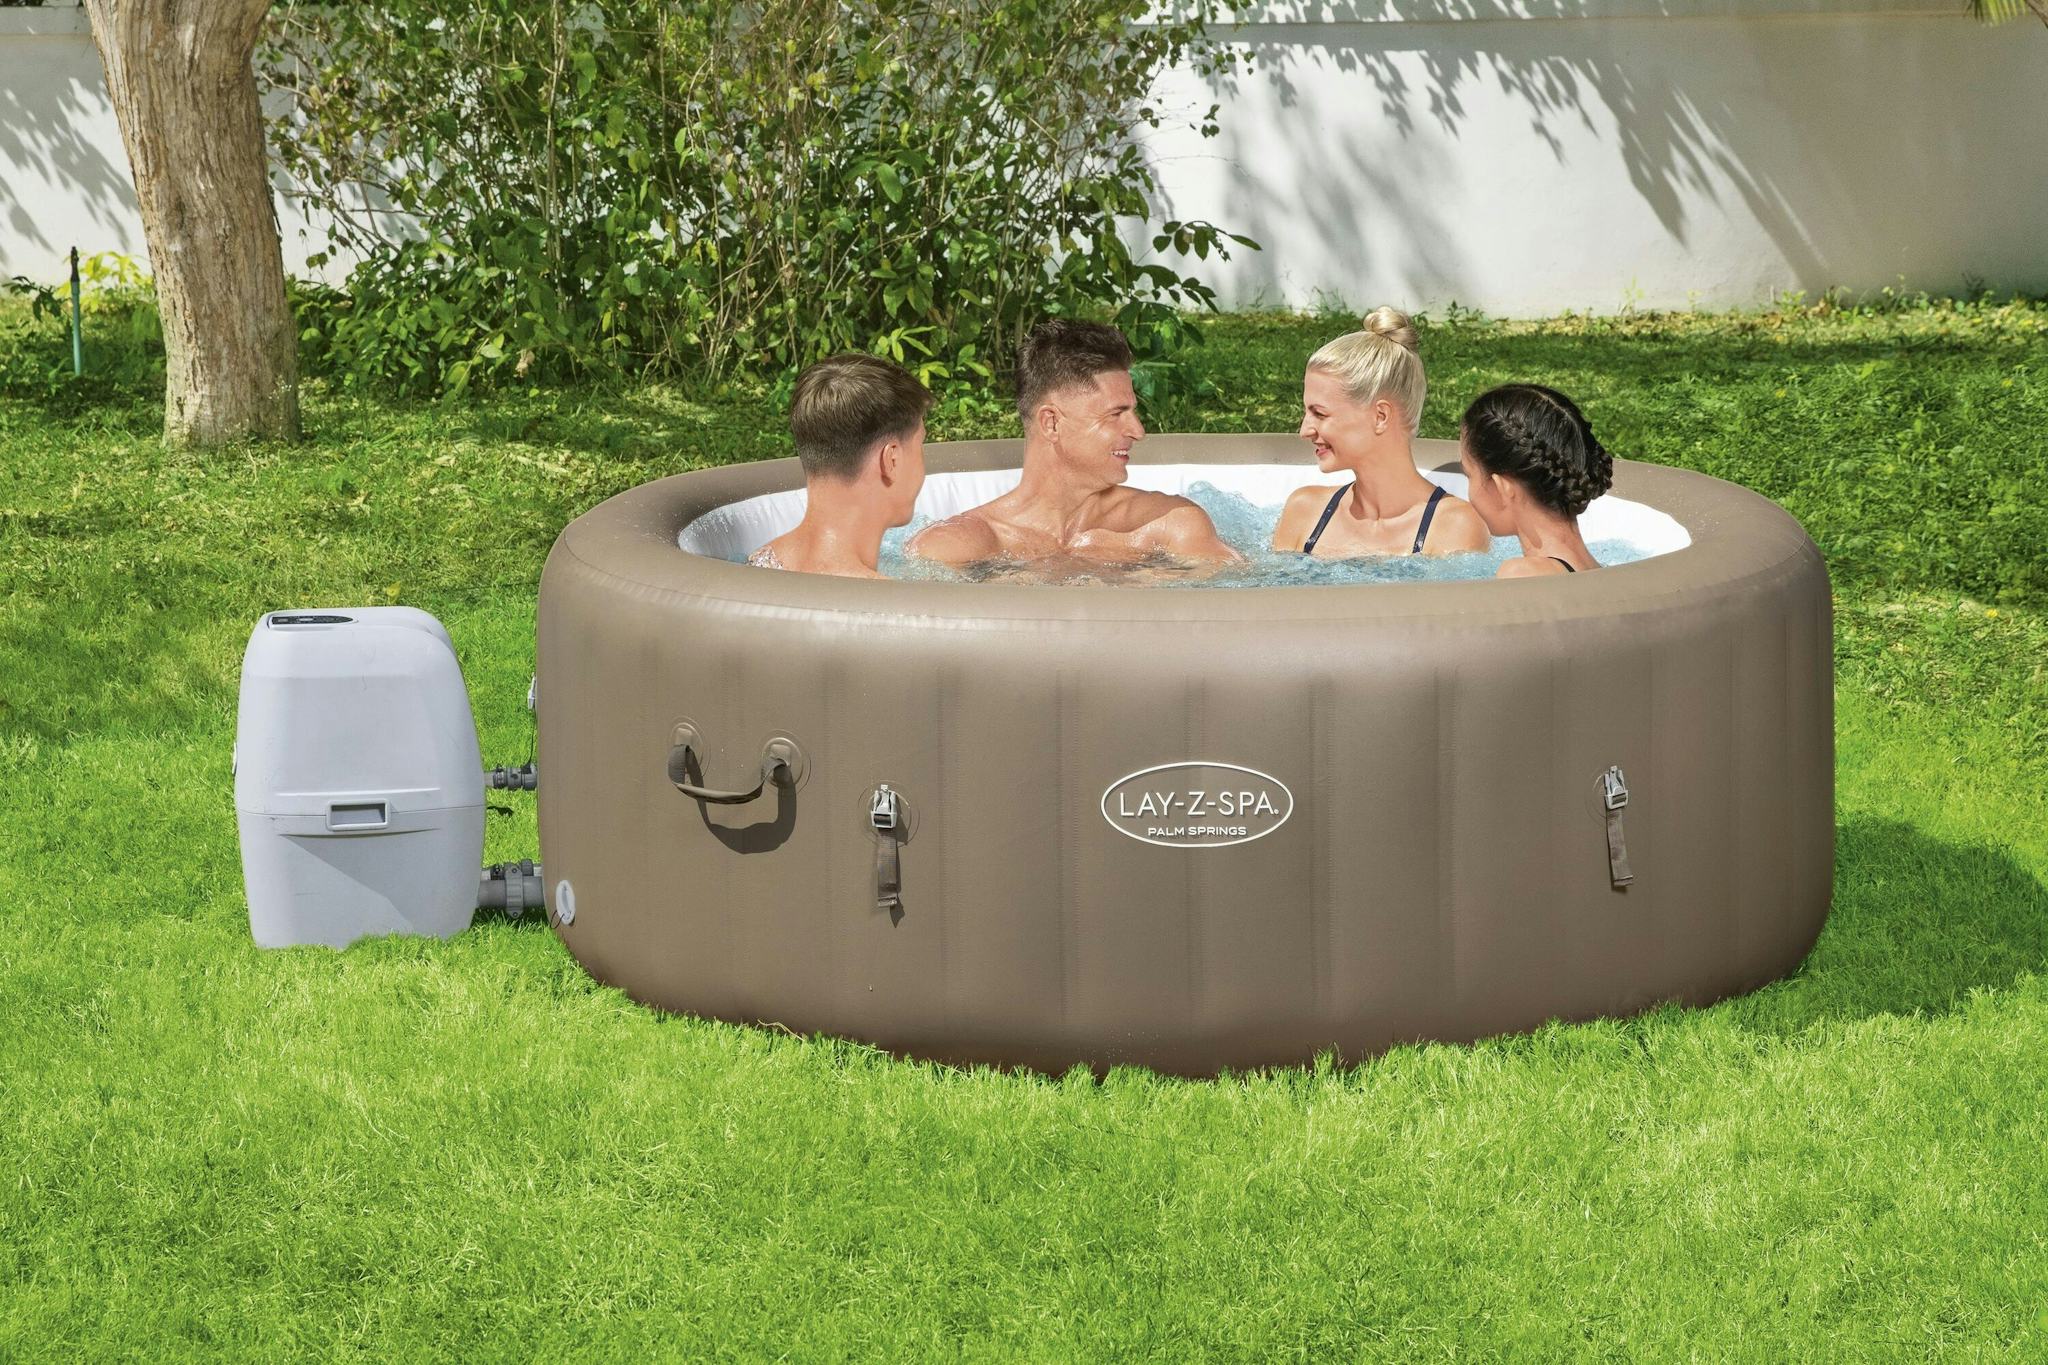 Spas Gonflables Spa gonflable rond Lay-Z-Spa Palm Springs Airjet™ 4 - 6 personnes Bestway 7